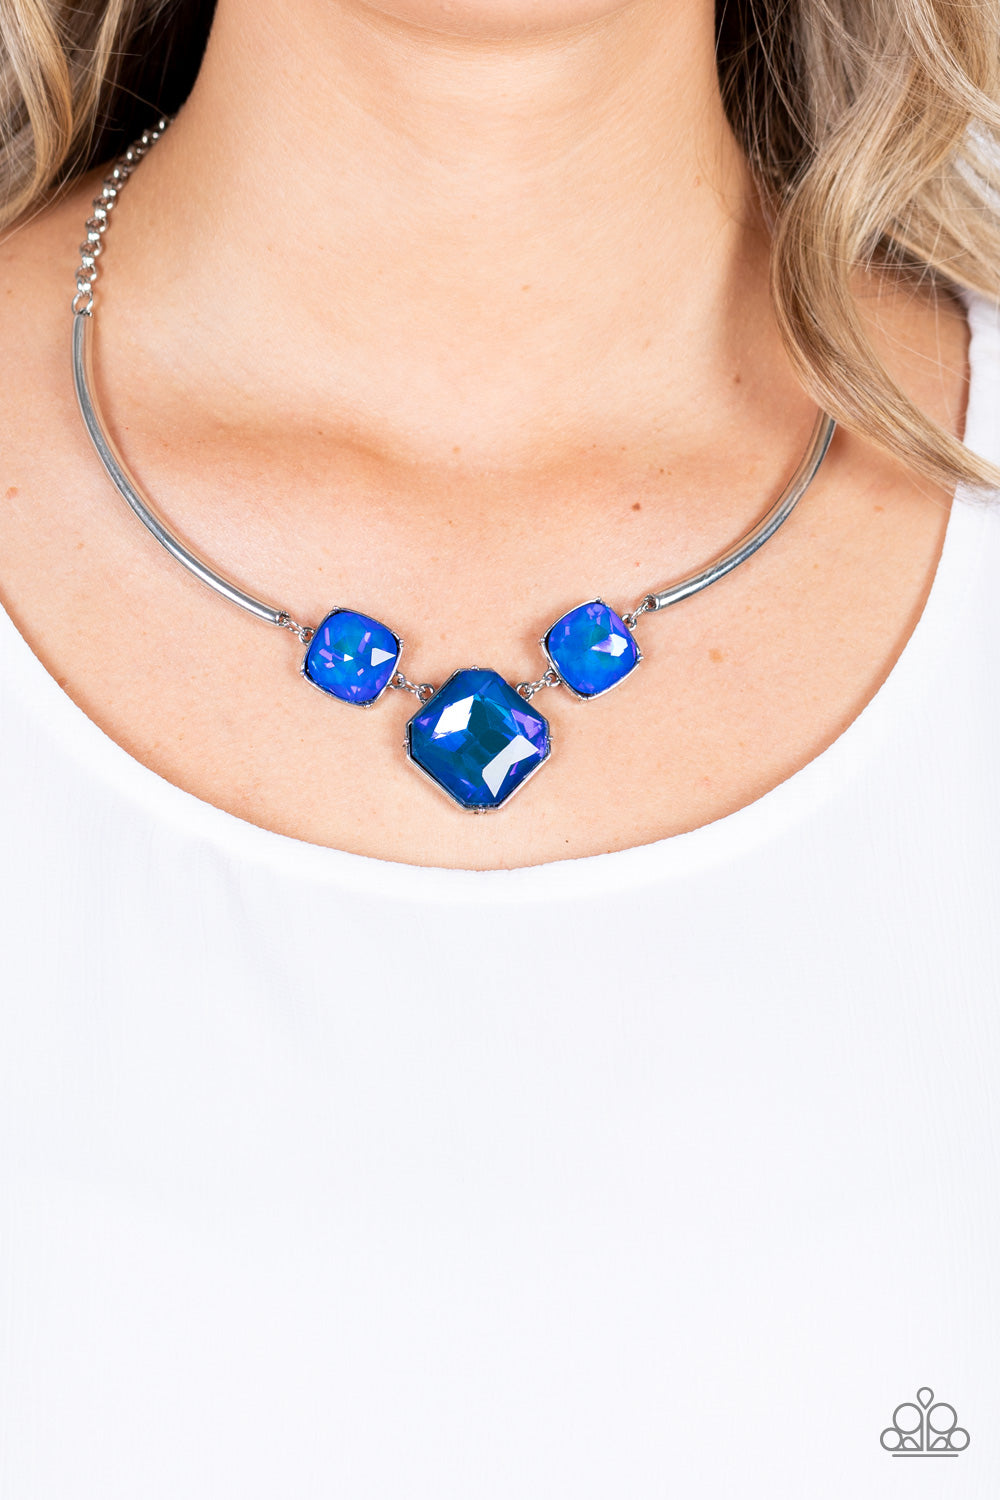 Paparazzi Necklaces - Divine Iridescence - Blue Life of the Party Oct. 2021